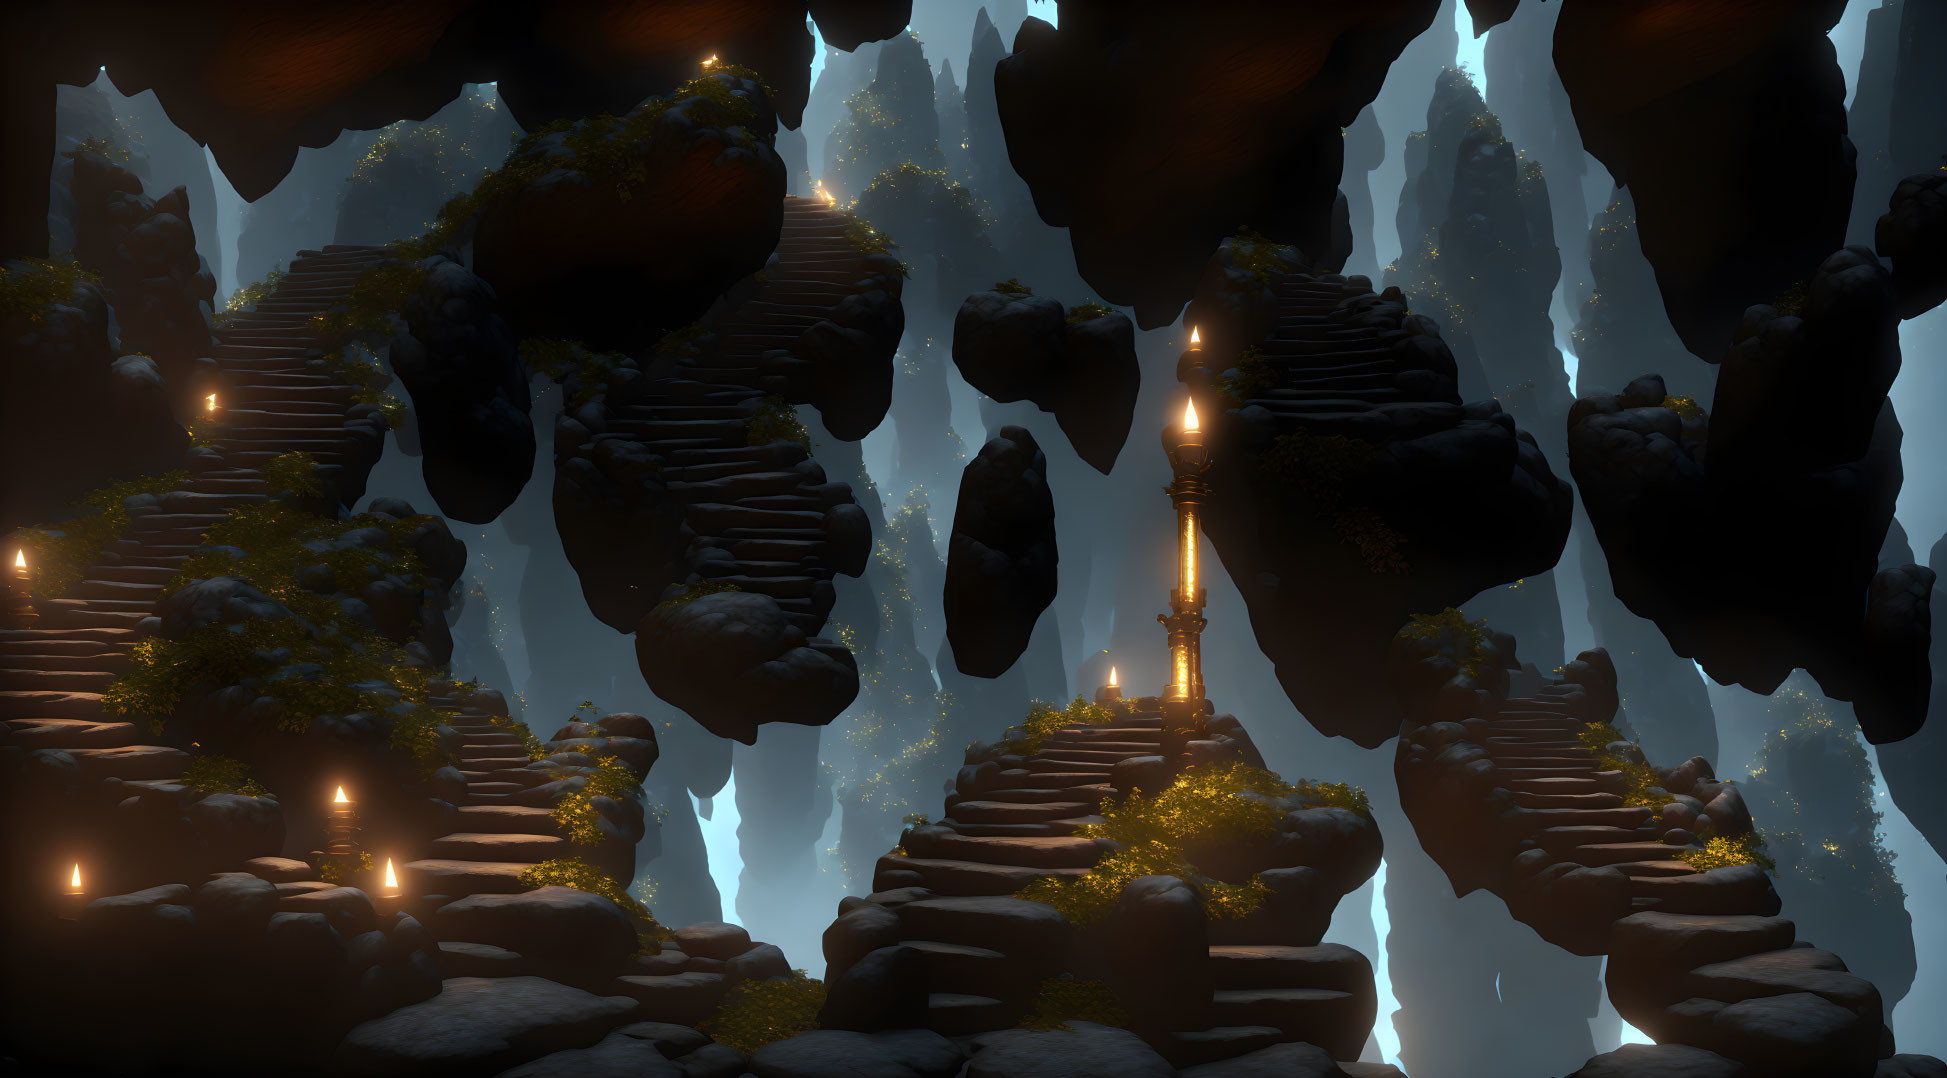 Mystical cave with floating rocks, glowing sword, candles, and ethereal light.